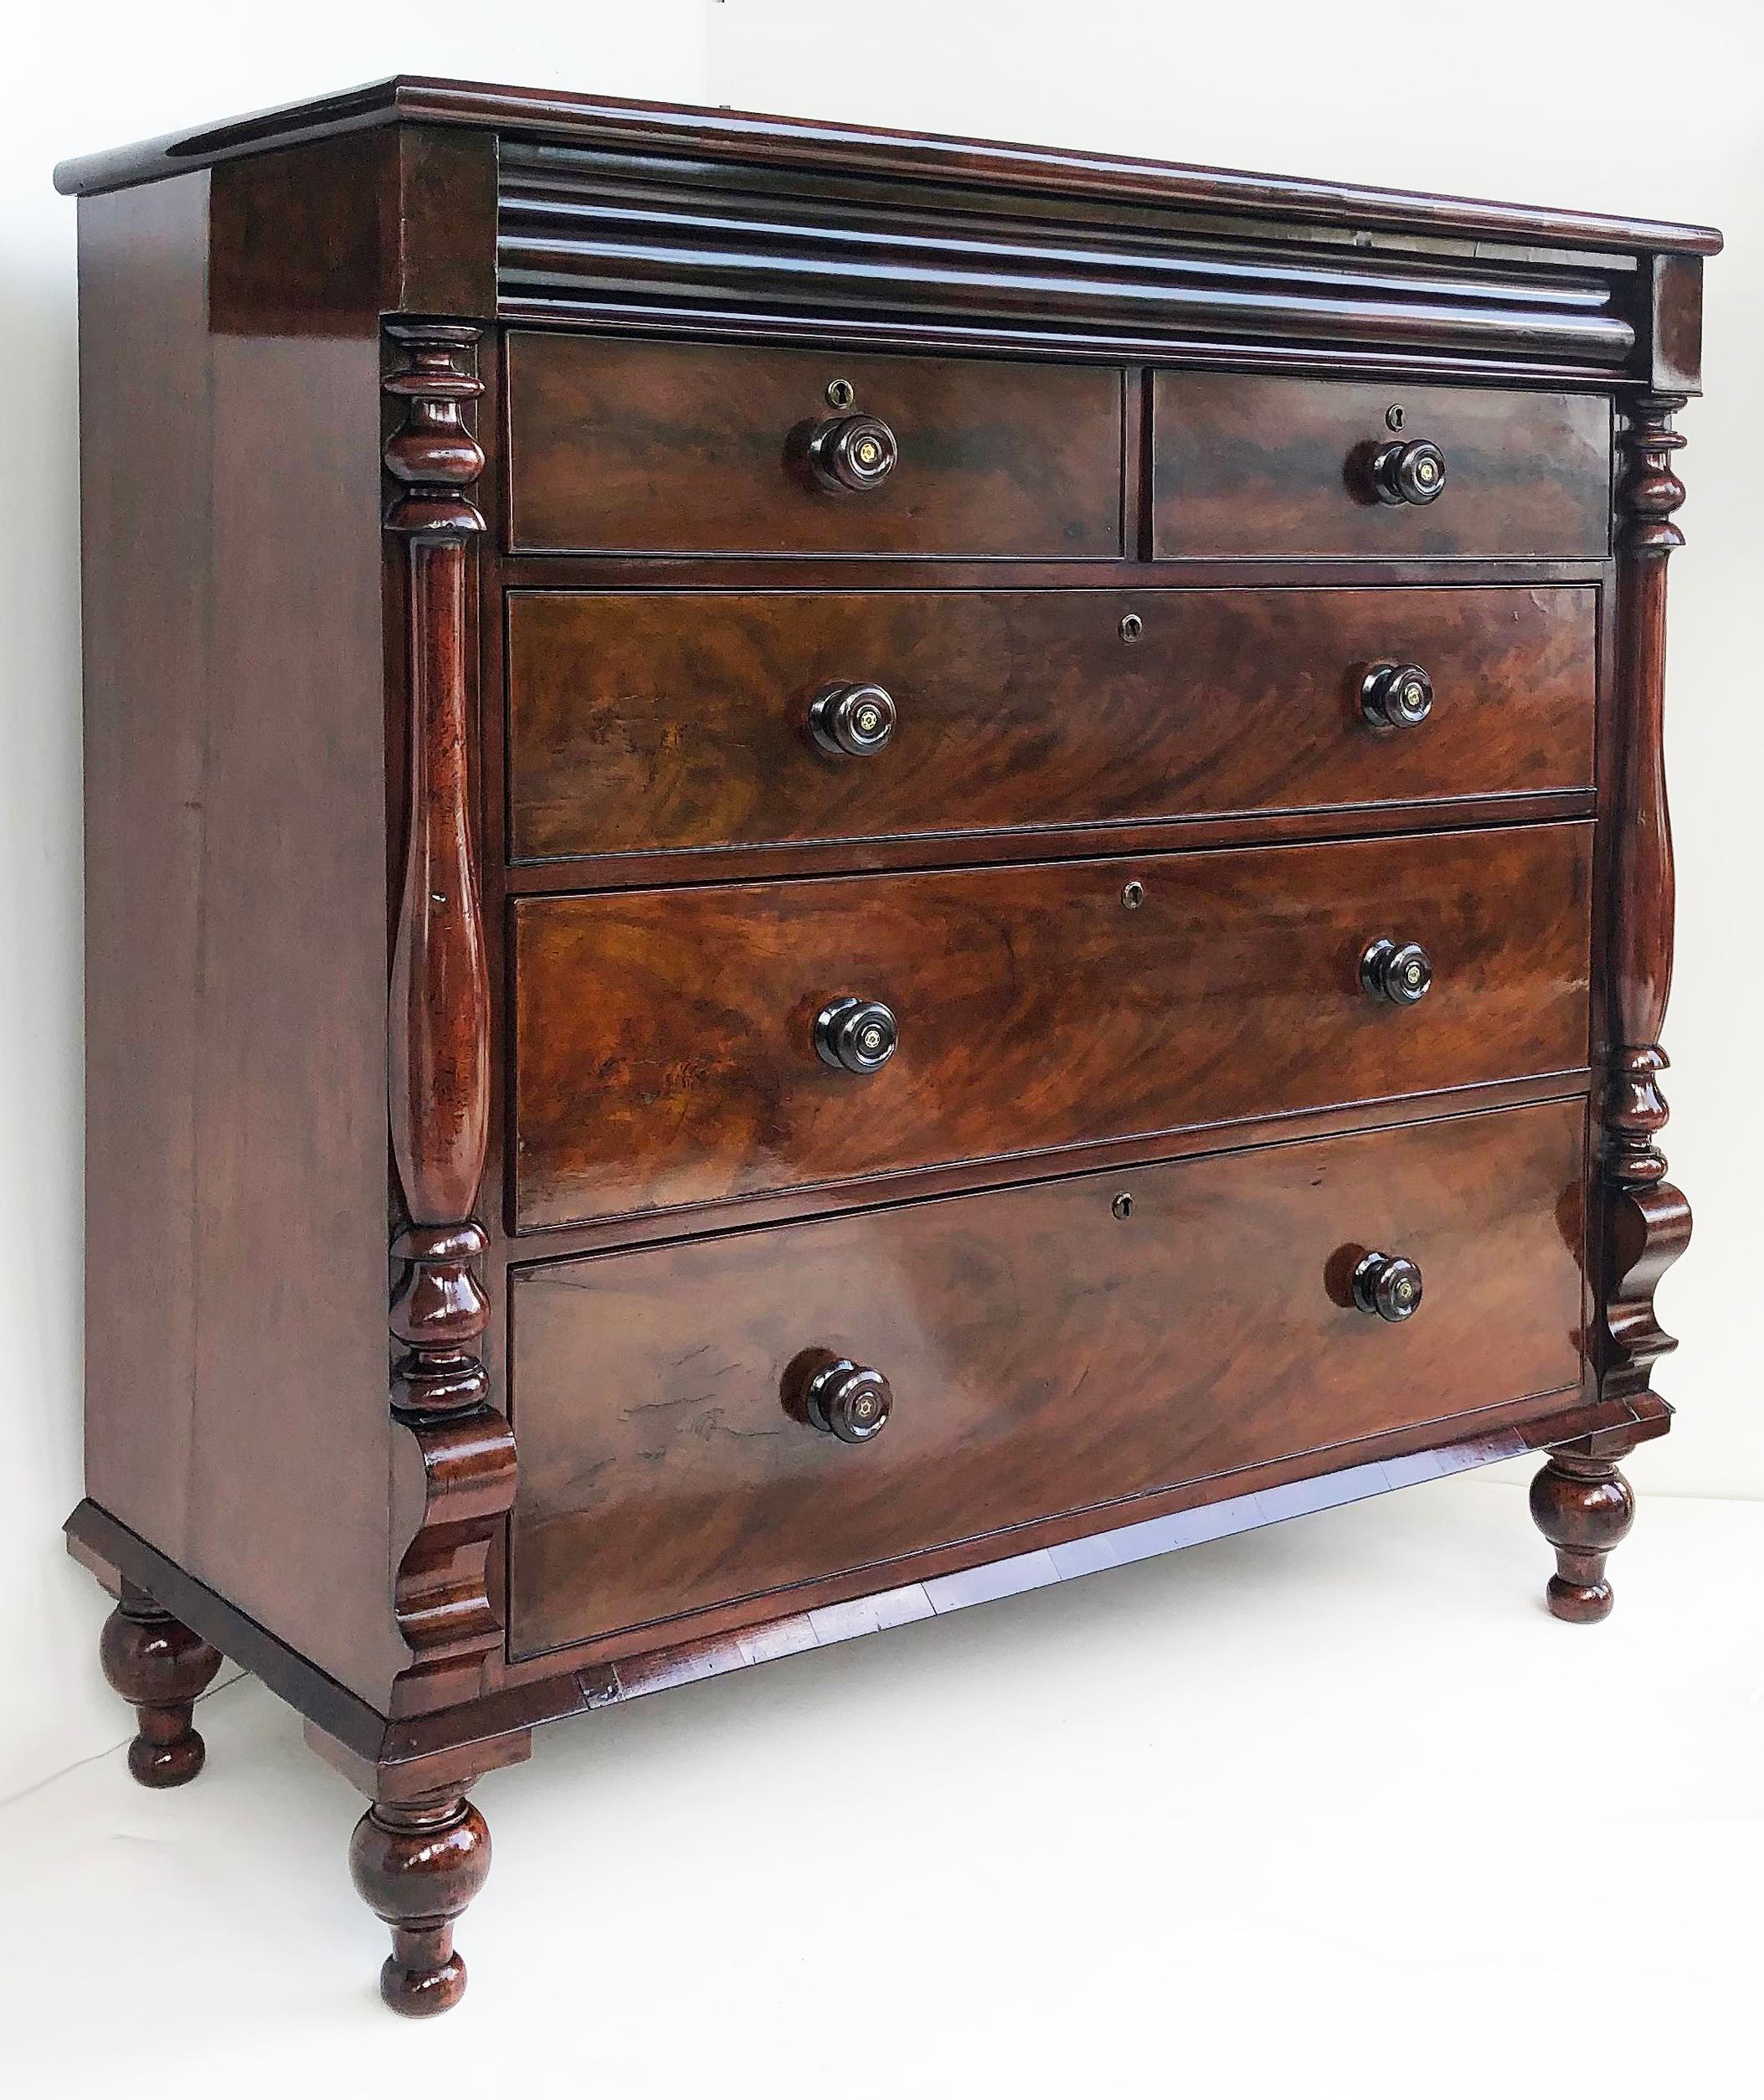 1830s American Empire flame mahogany chest of drawers with mother of pearl

Offered is a circa 1830s American Empire flame mahogany chest of drawers. The original pulls have inset mother-of-pearl details. The chest has five dovetailed drawers that